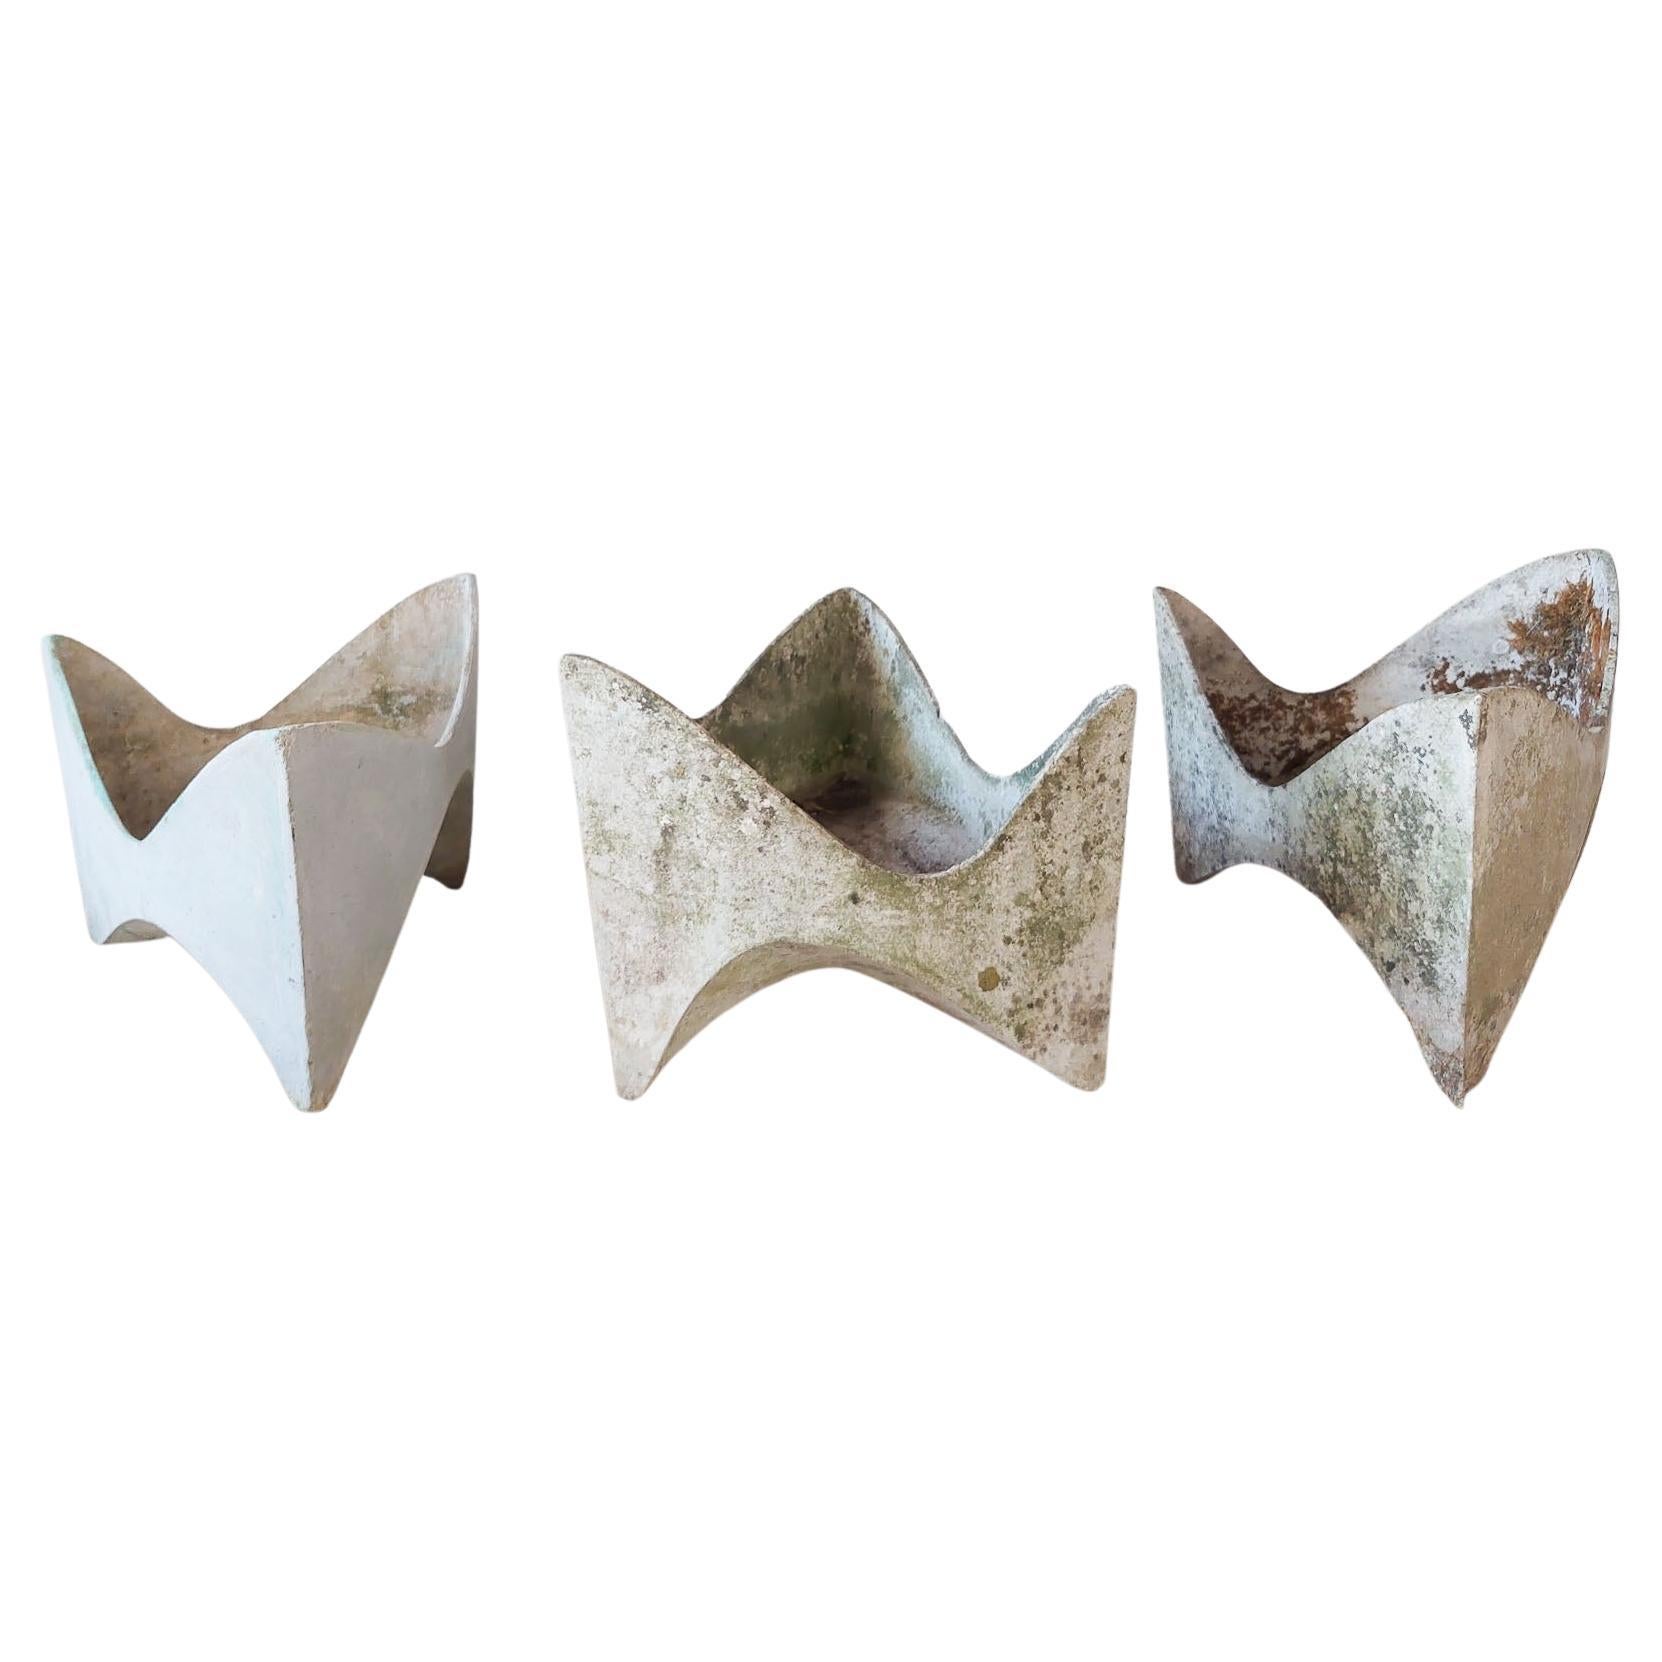 Willy Guhl Triangular Tooth Planters (multiple available)